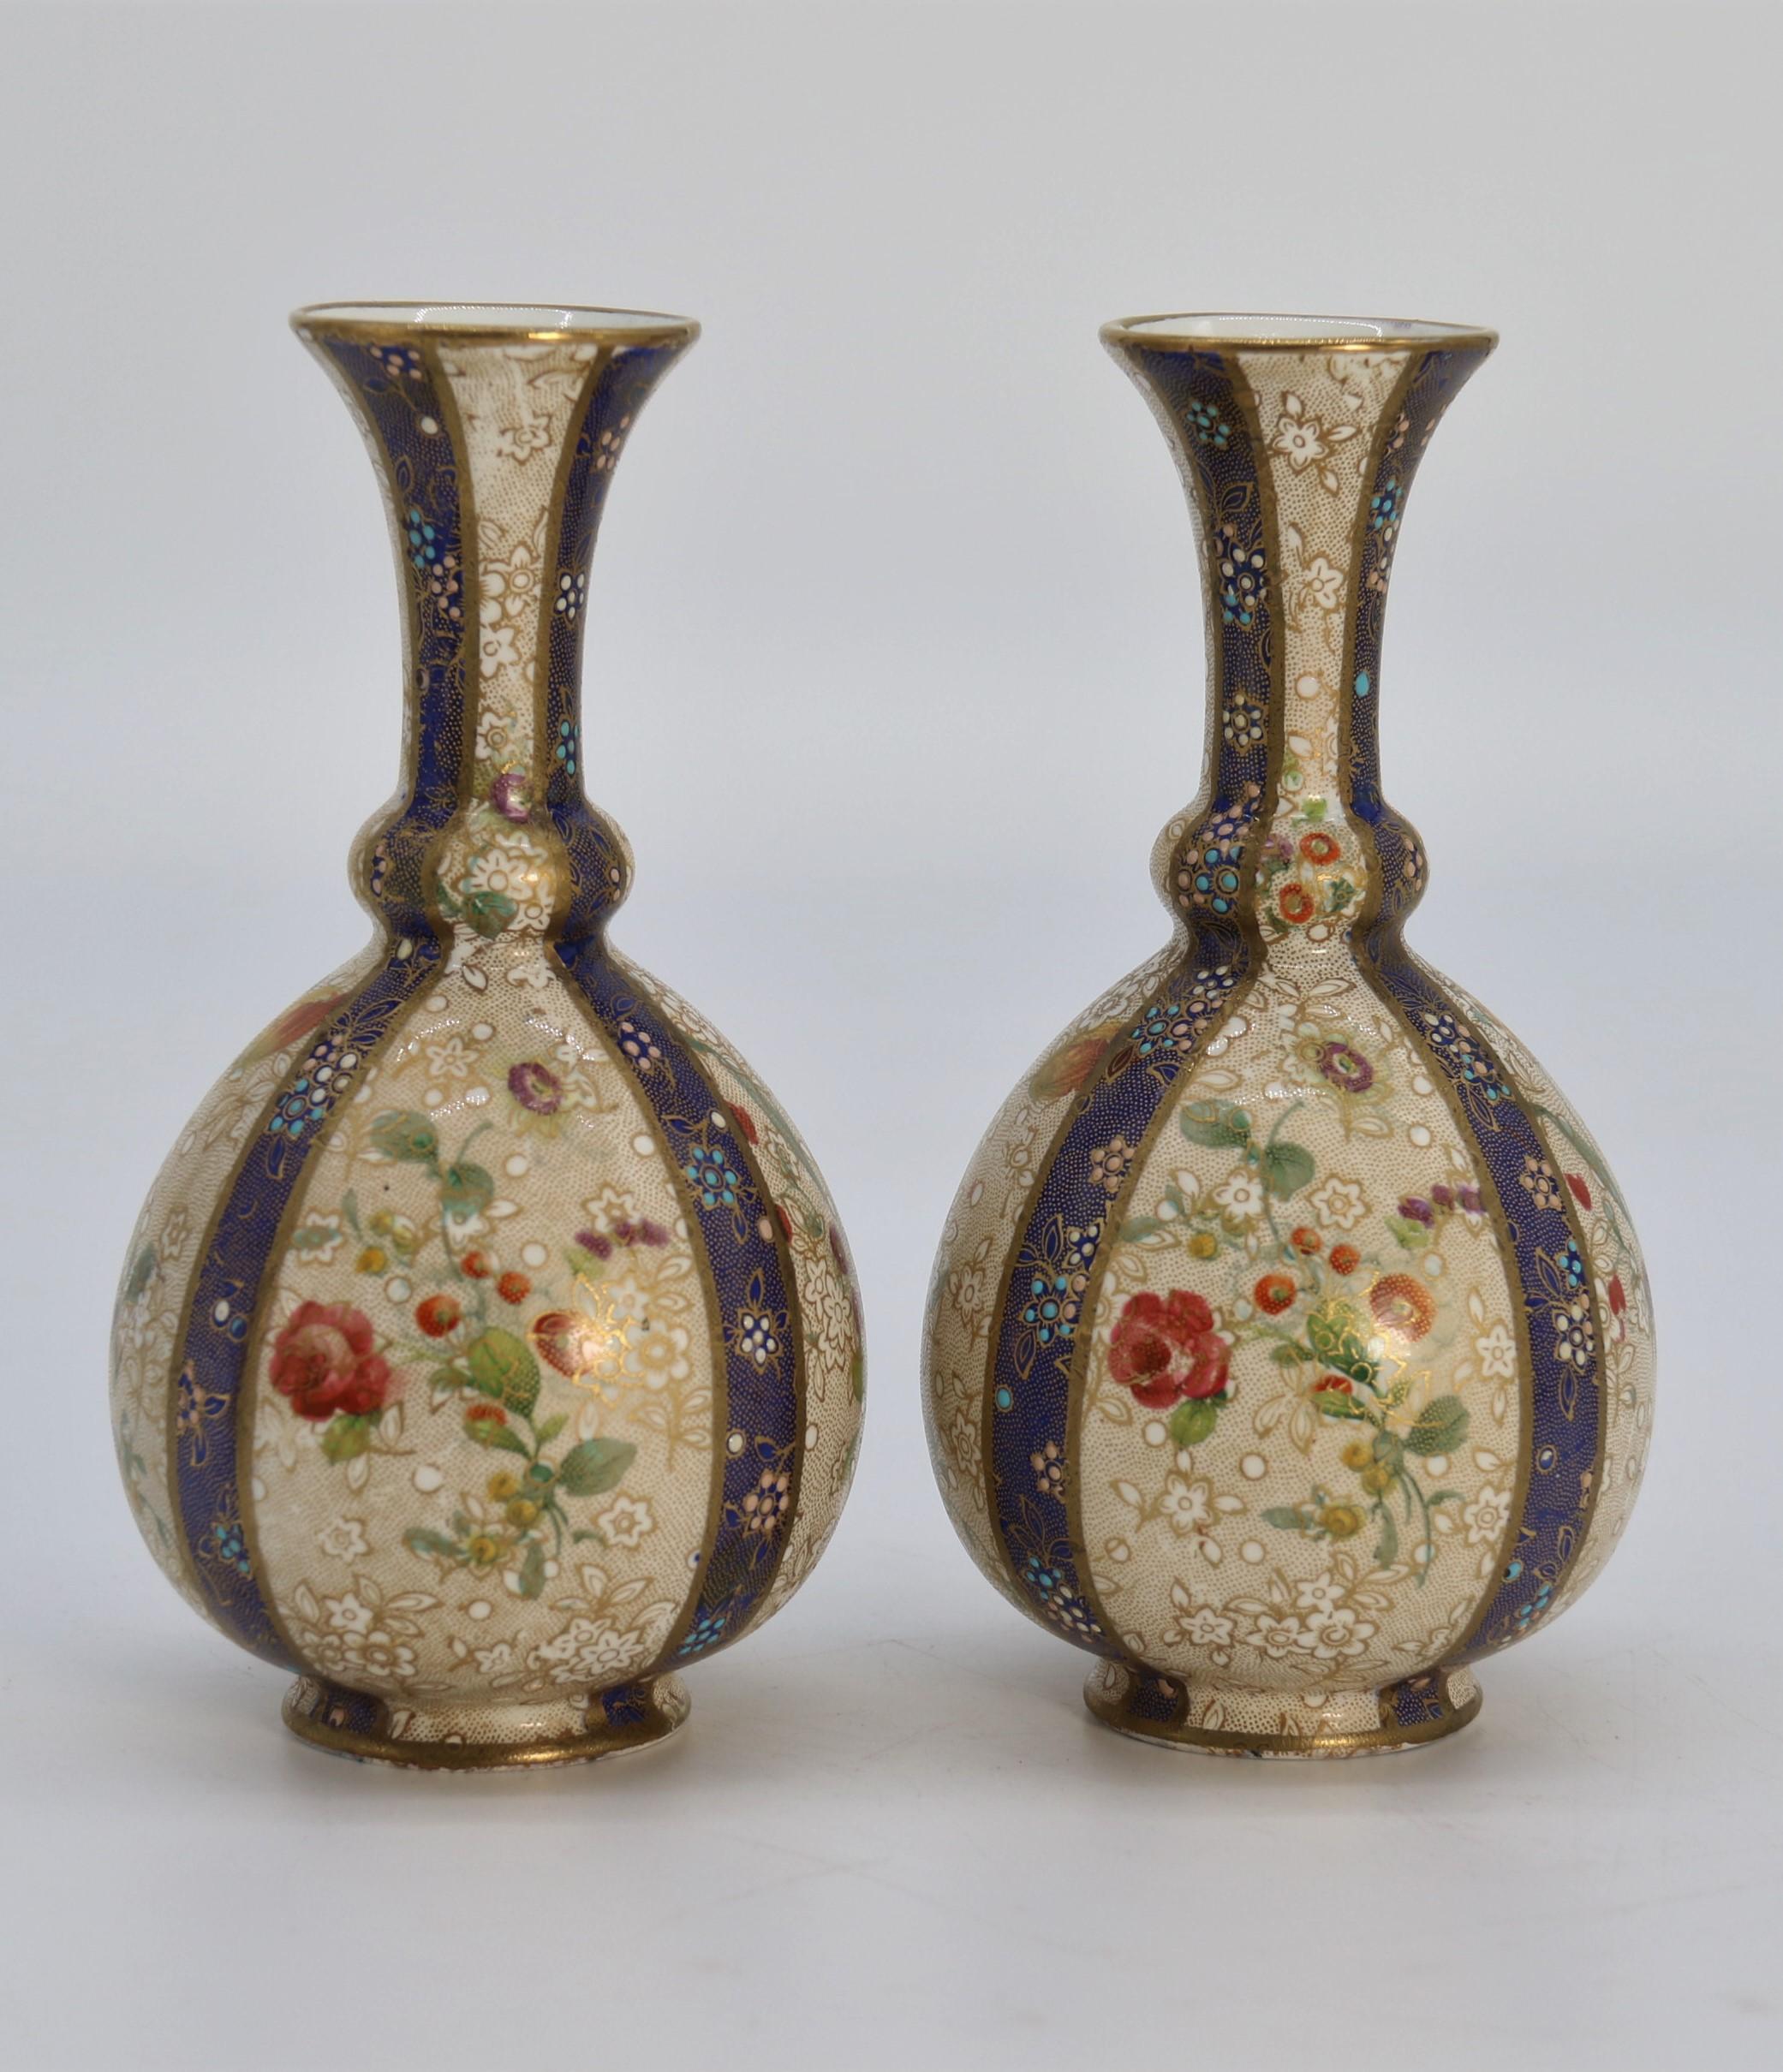 Other A pair of English early Carlton Ware enamelled and gilt floral vases, circa 1900